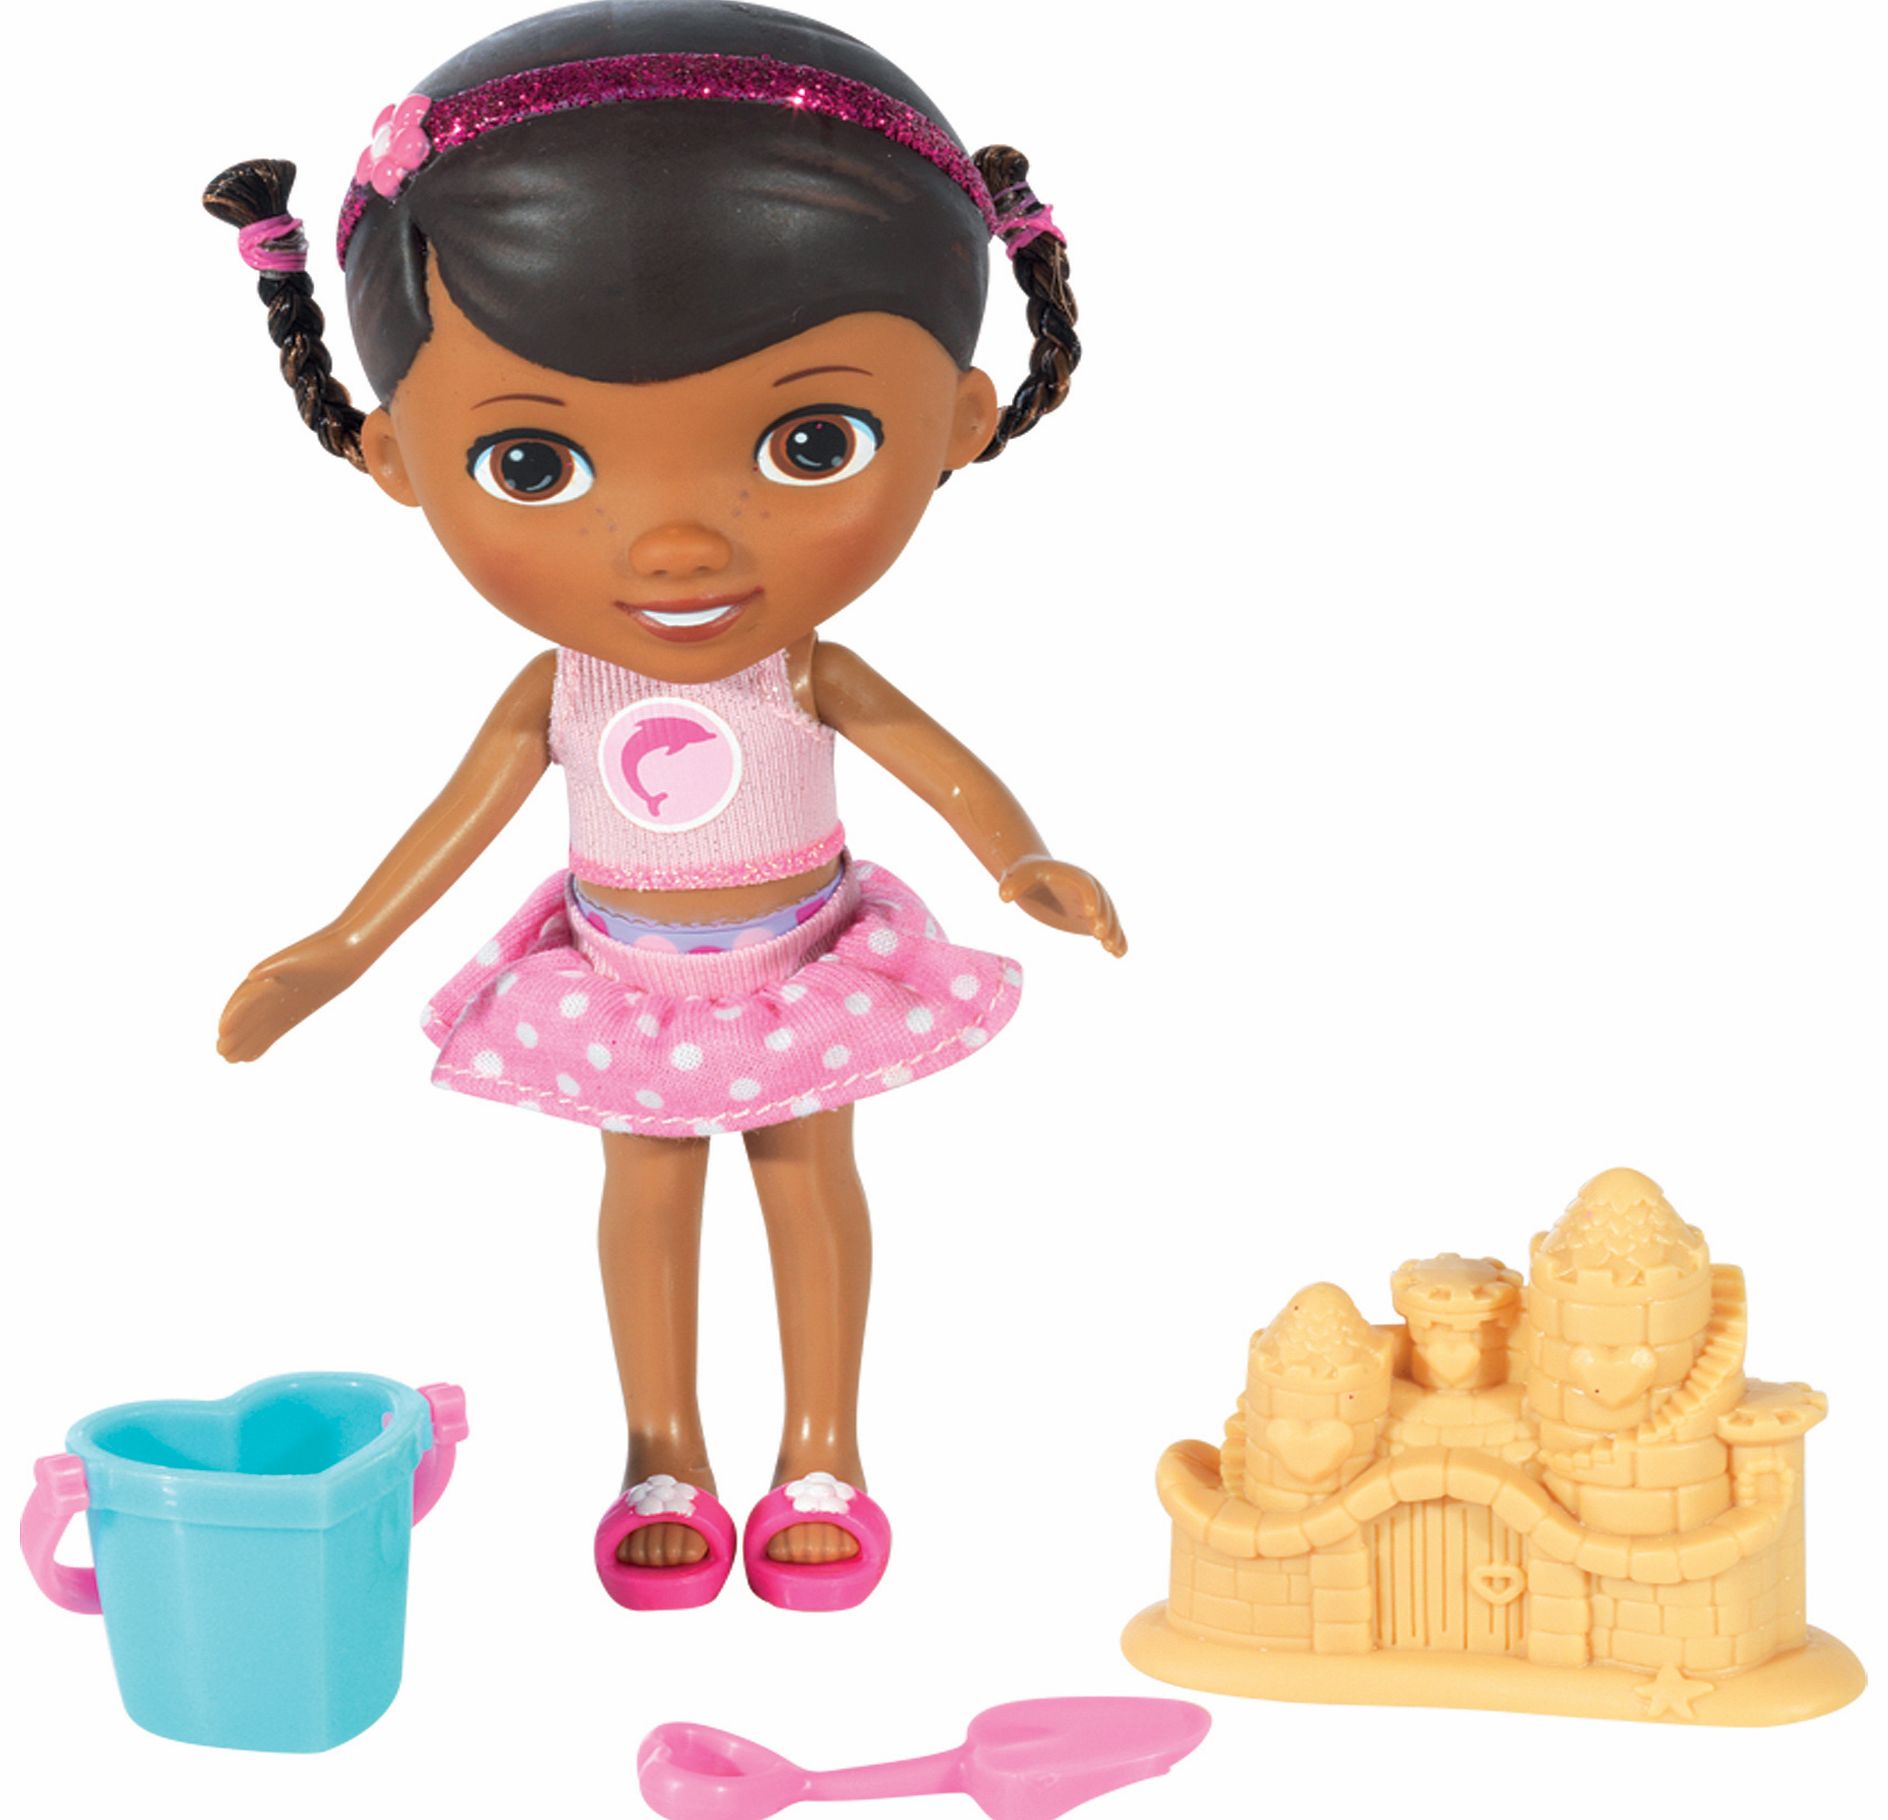 Disney Doc McStuffins Doll with Accessories